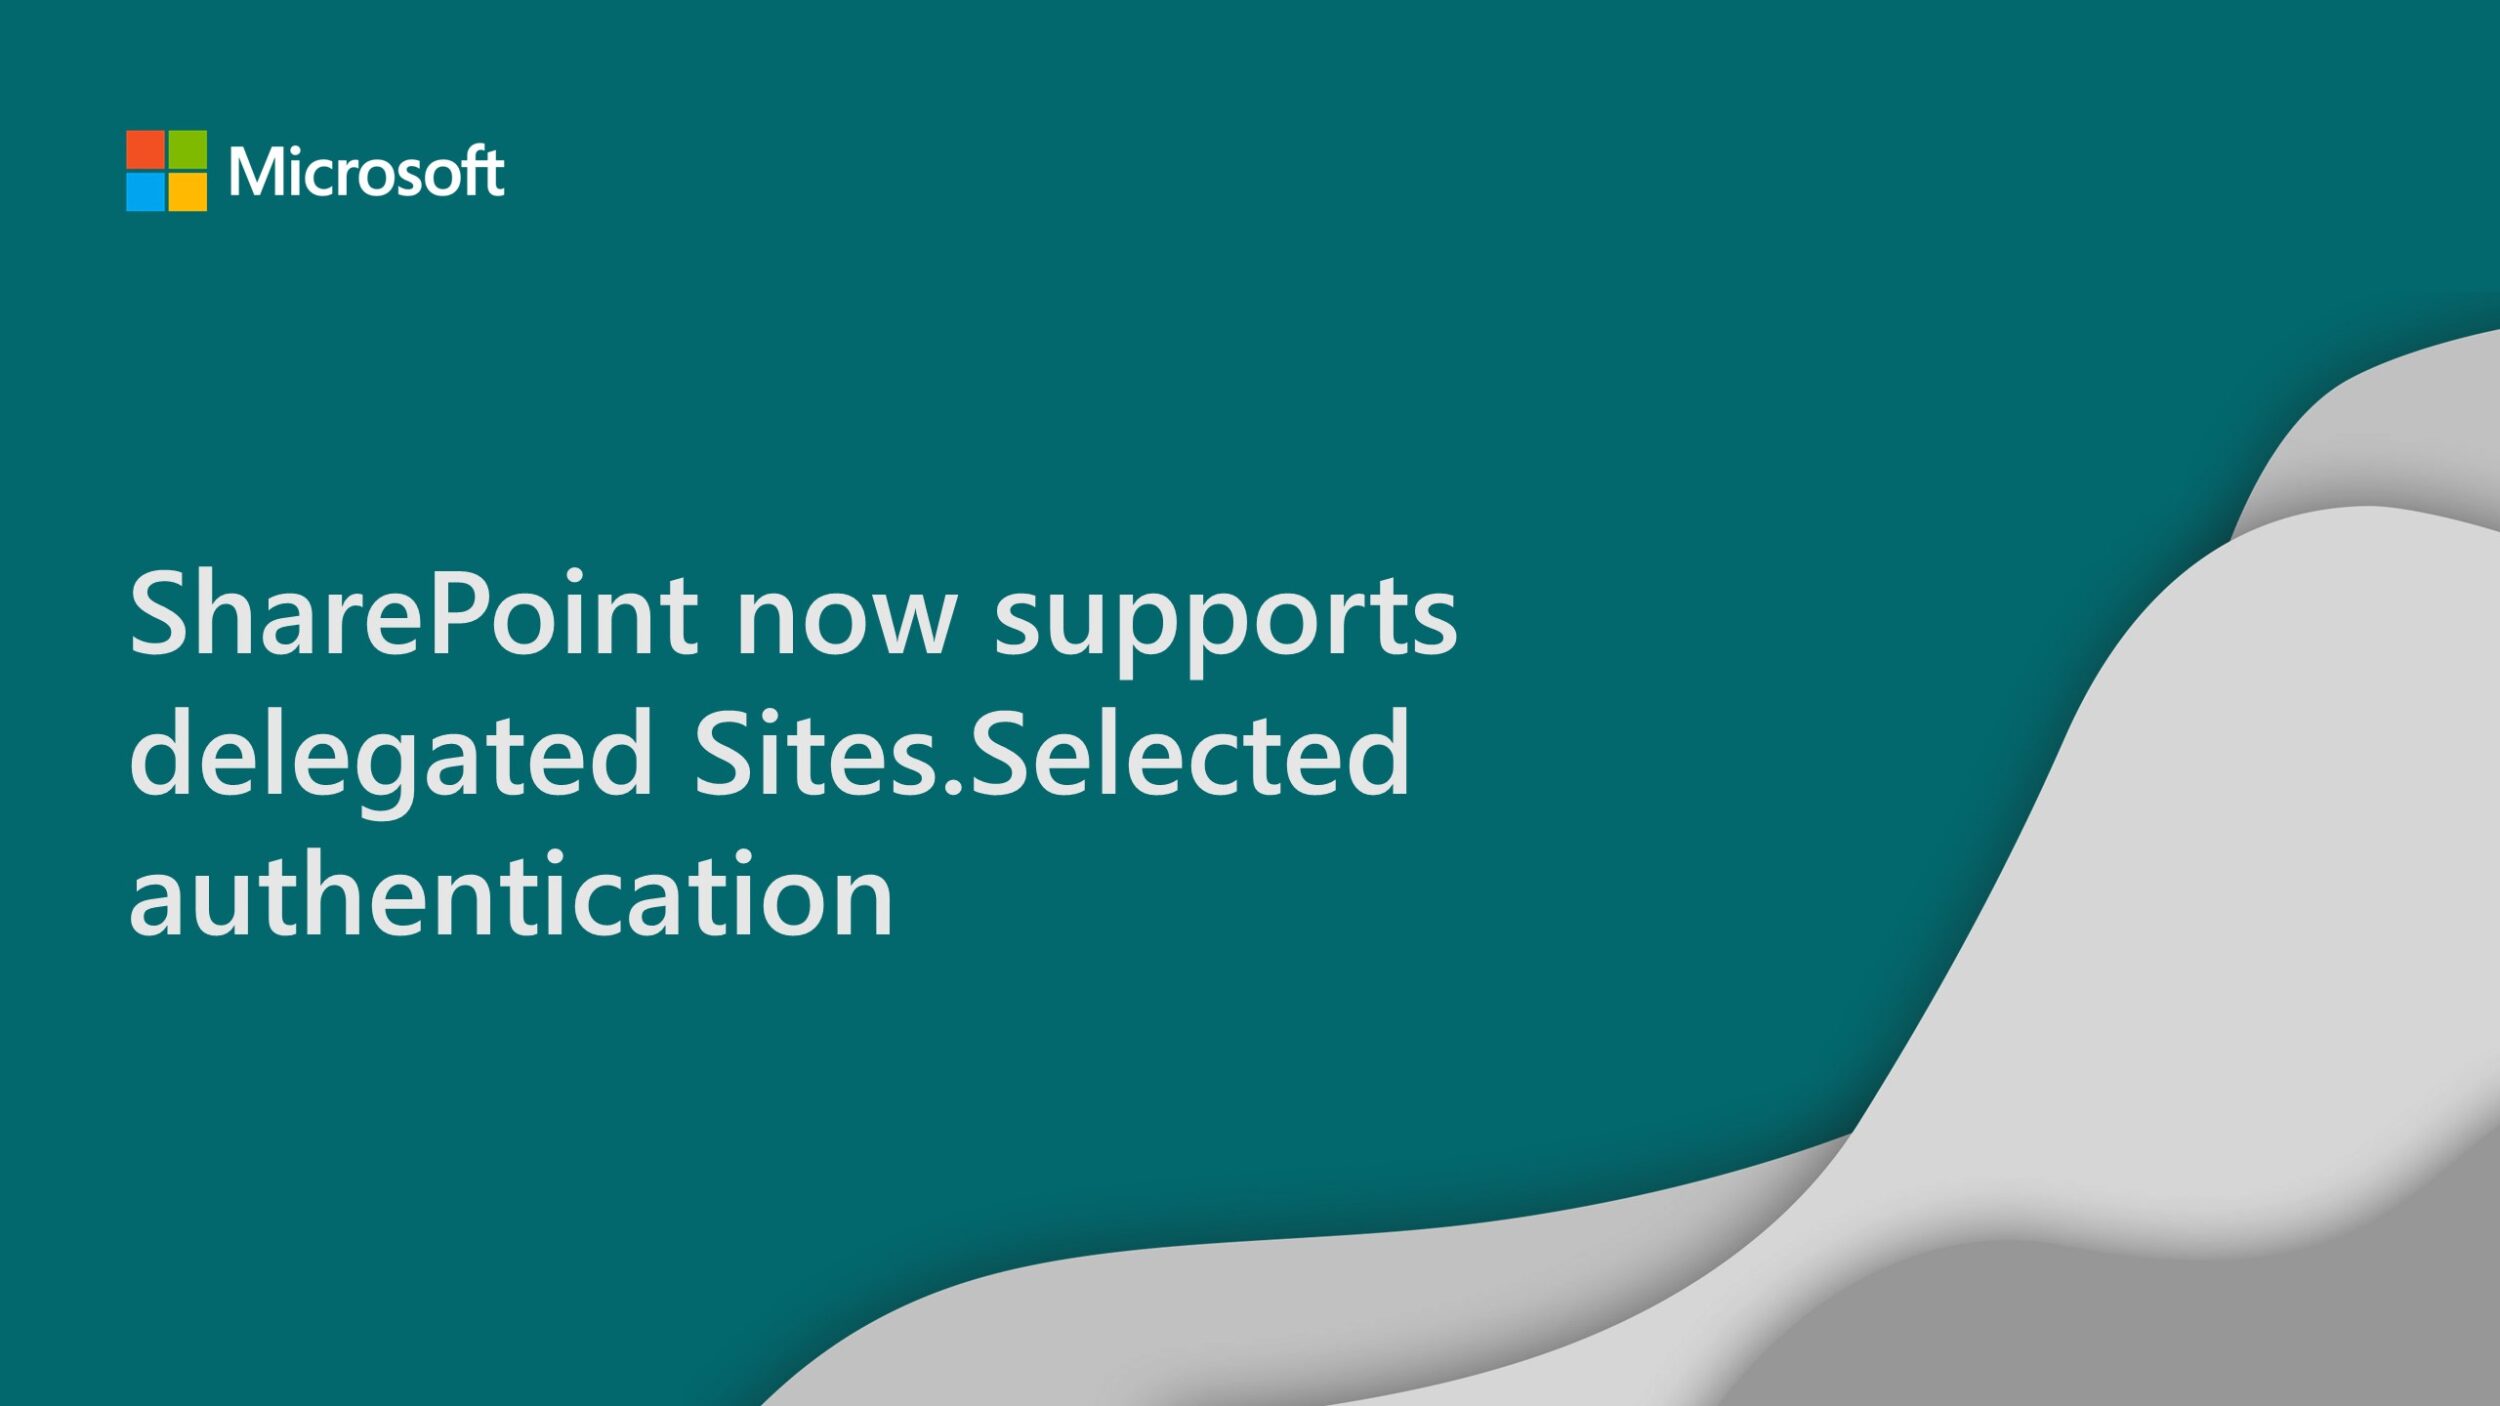 SharePoint now supports delegated Sites.Selected authentication